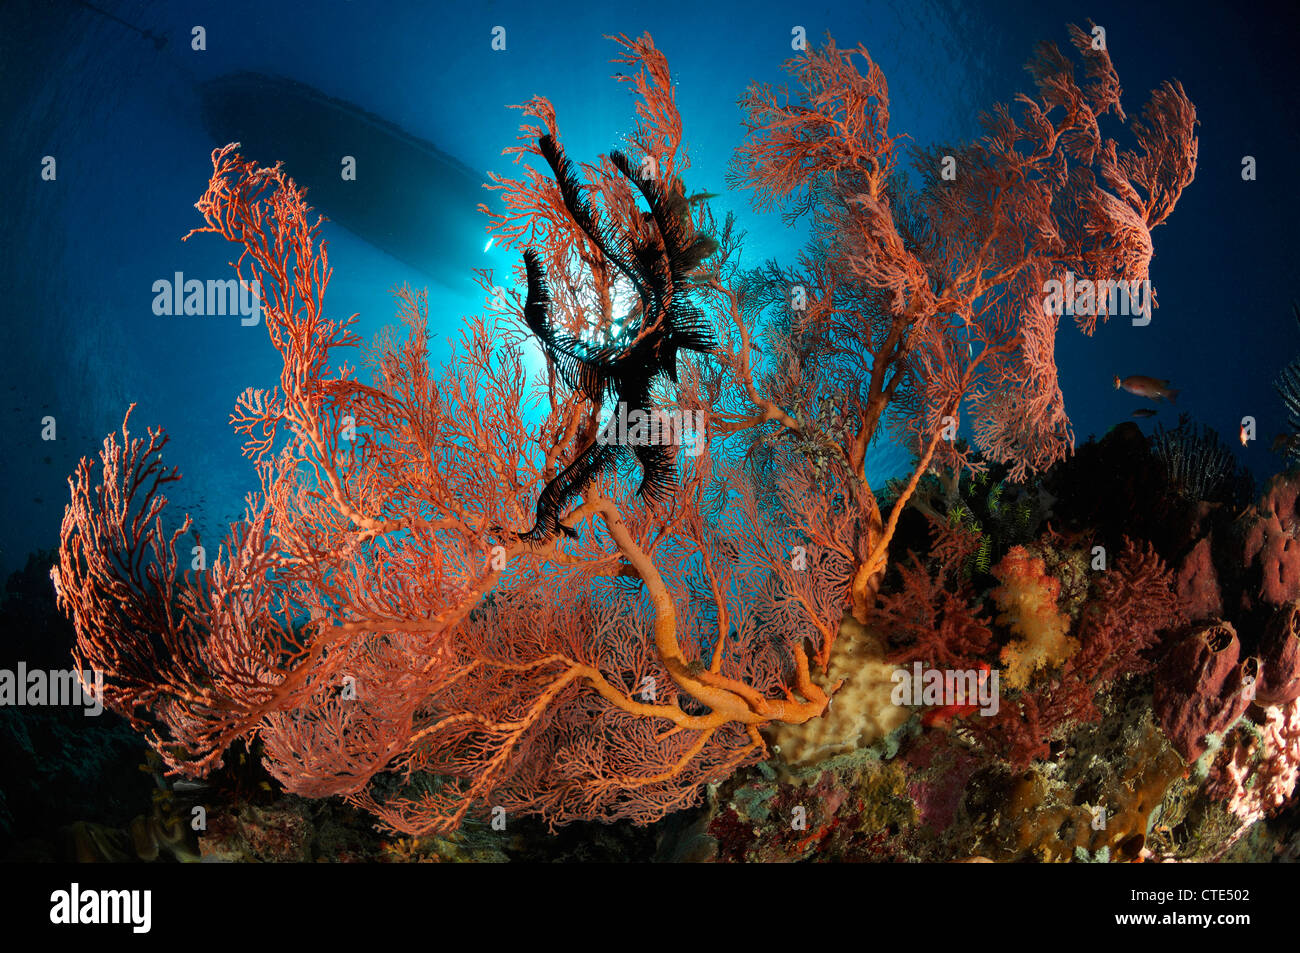 Seafan in Coral Reef, Melithaea sp., Alor, Indonesia Foto Stock